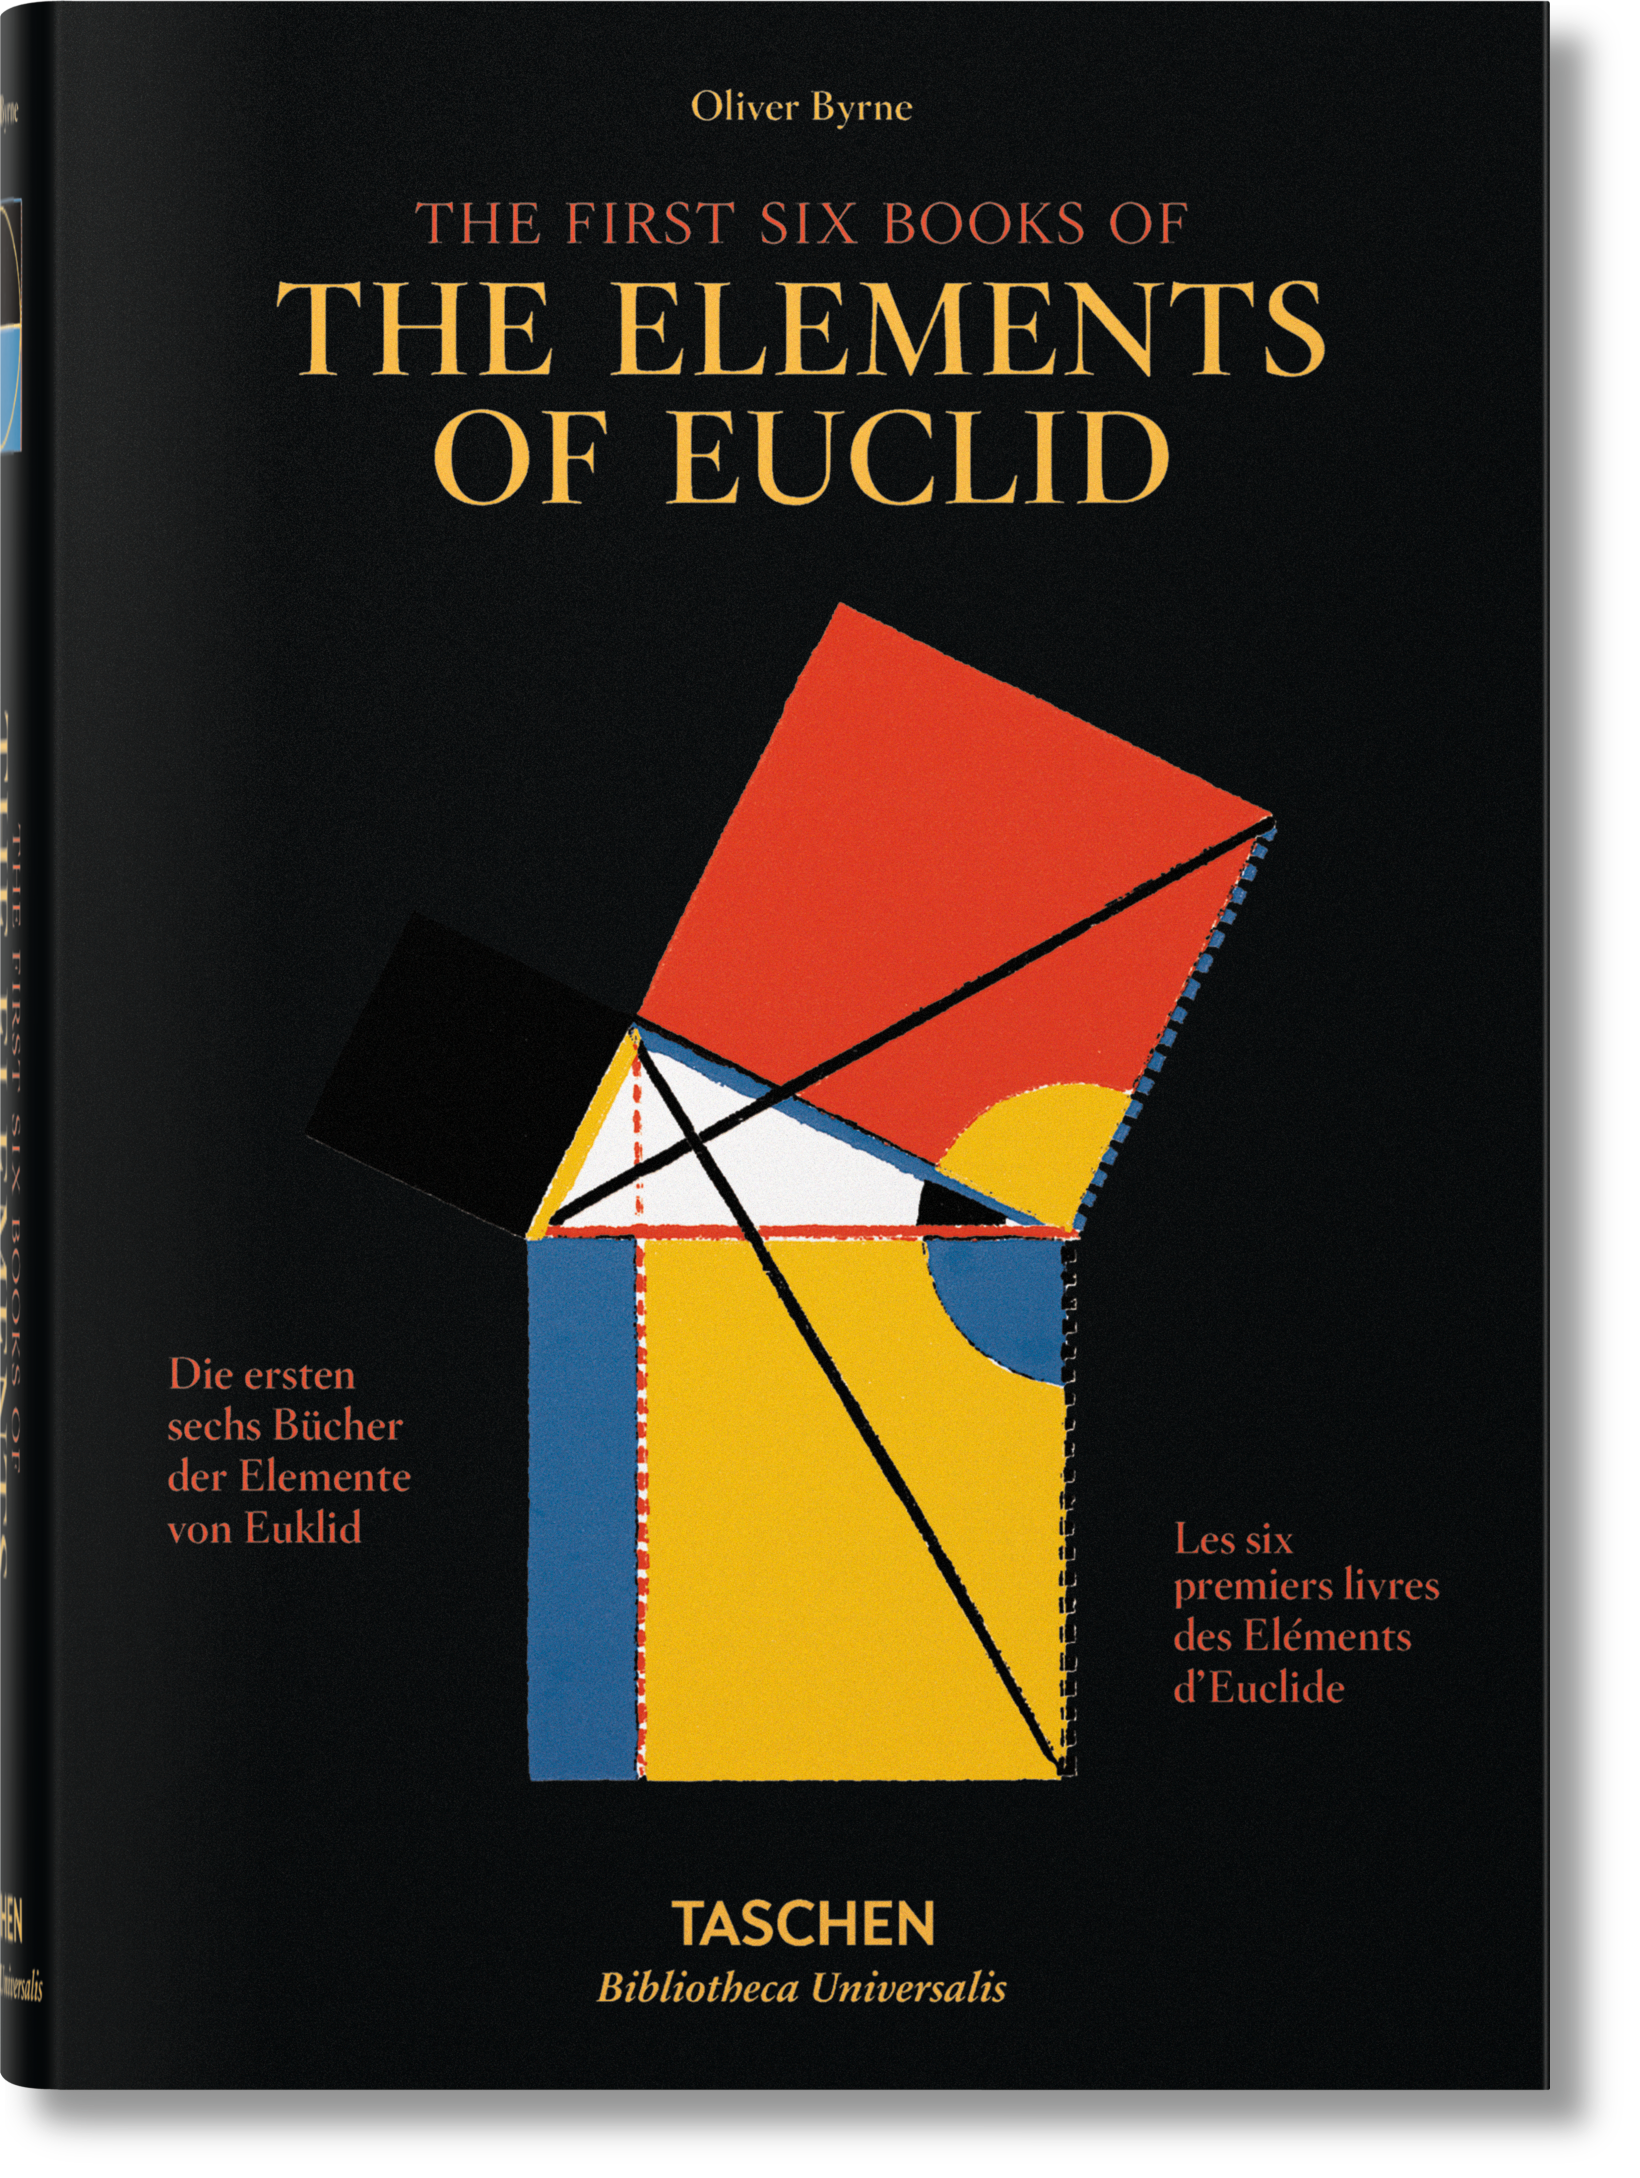 Lincoln’s favorite book, Elements of Euclid by TASCHEN